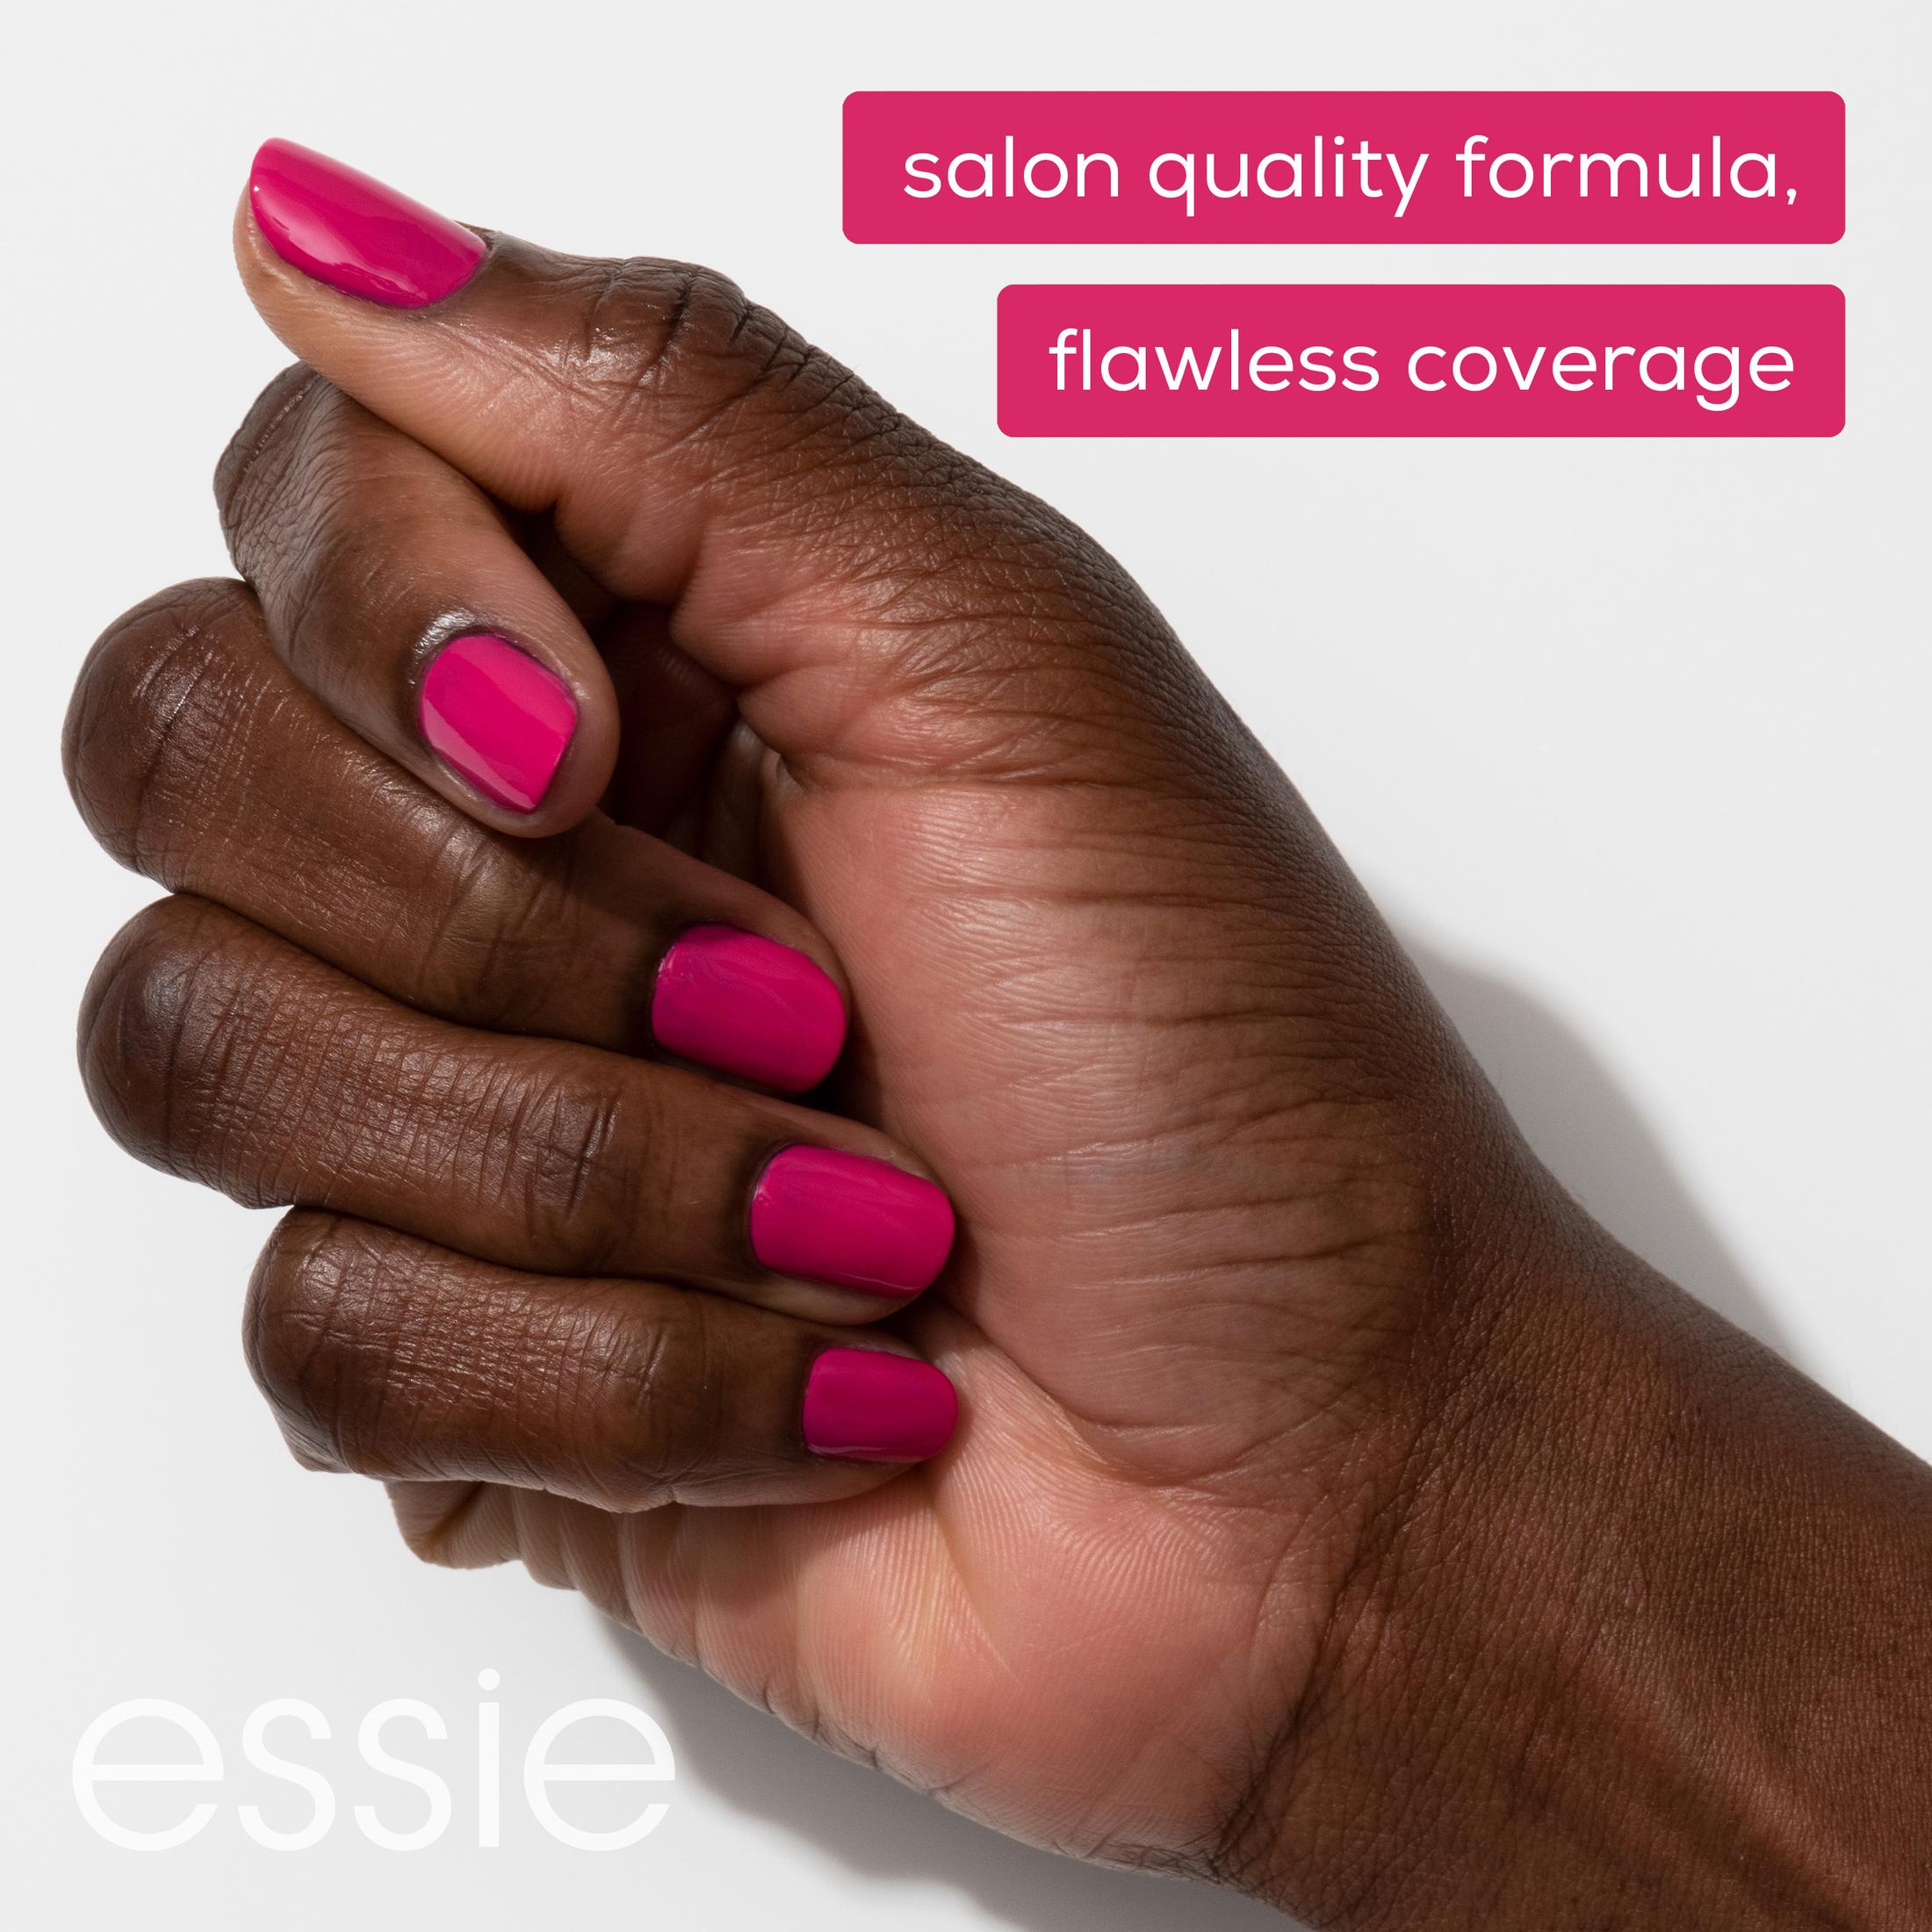 essie Salon Quality Nail Polish, Turquoise and Caicos, Muted Green, 0.46 fl. oz Bottle - image 5 of 13